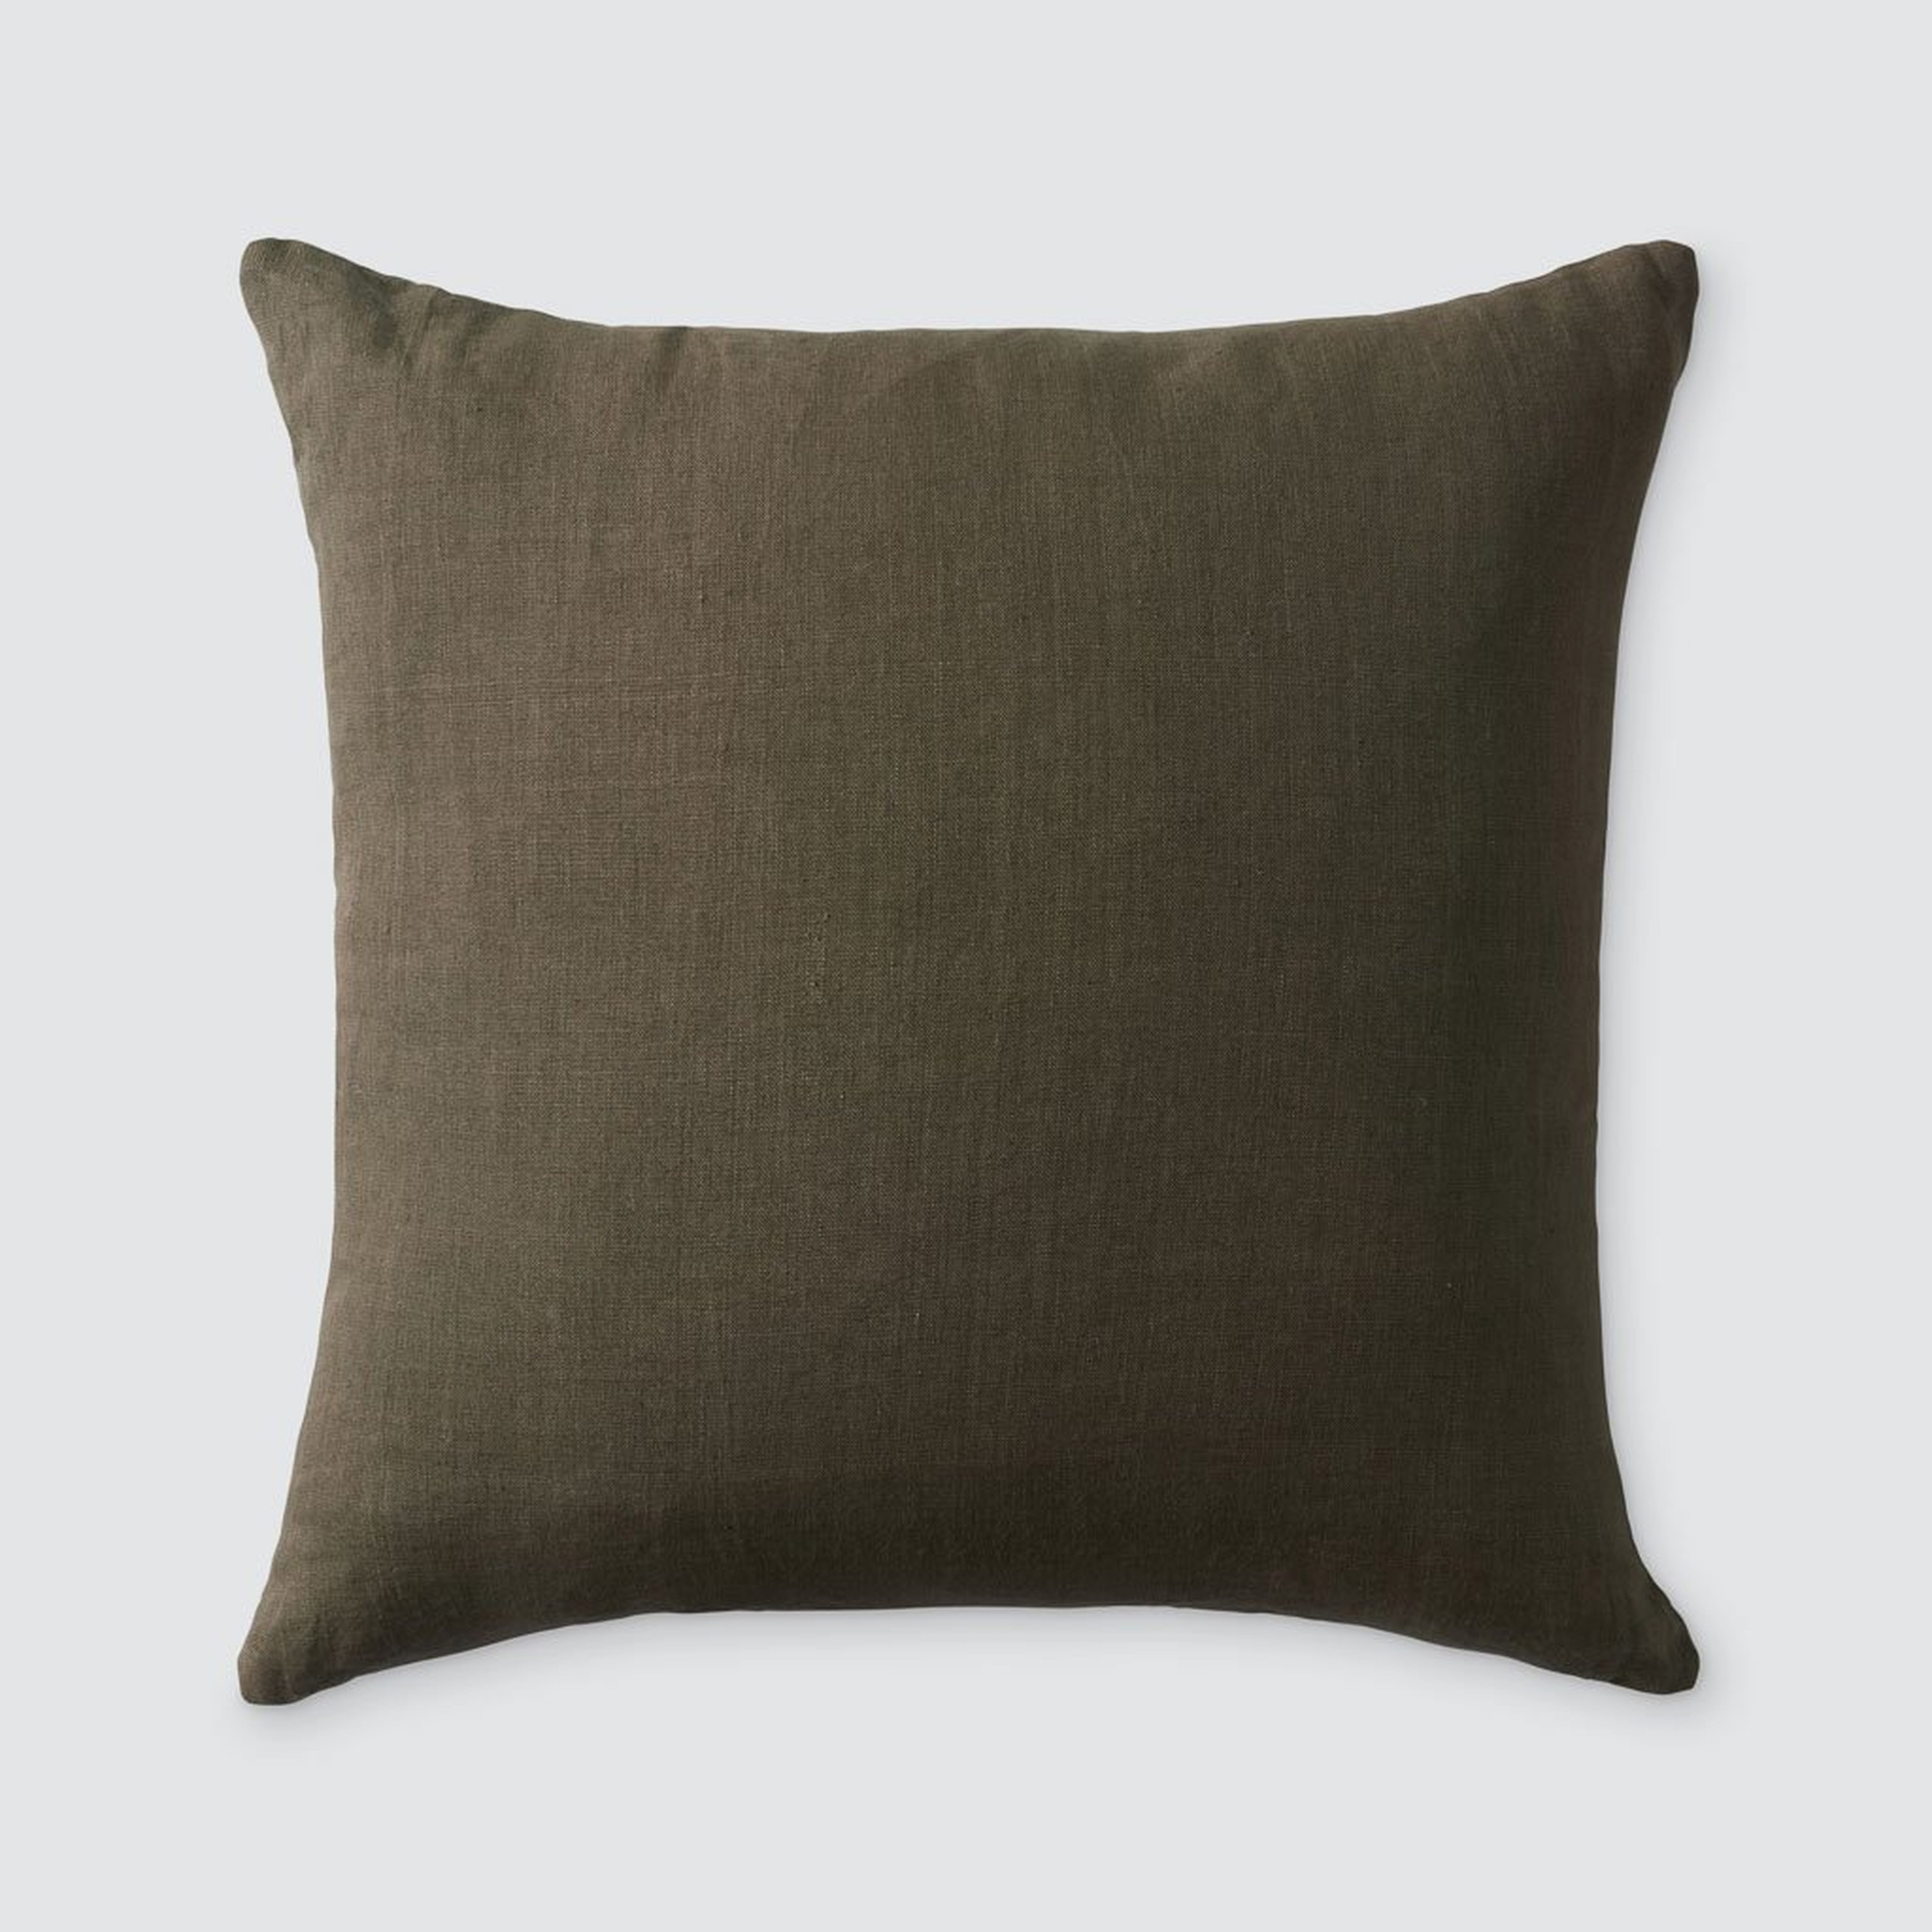 Prisha Linen Pillow - Olive - 20'' x 20'' By The Citizenry - The Citizenry